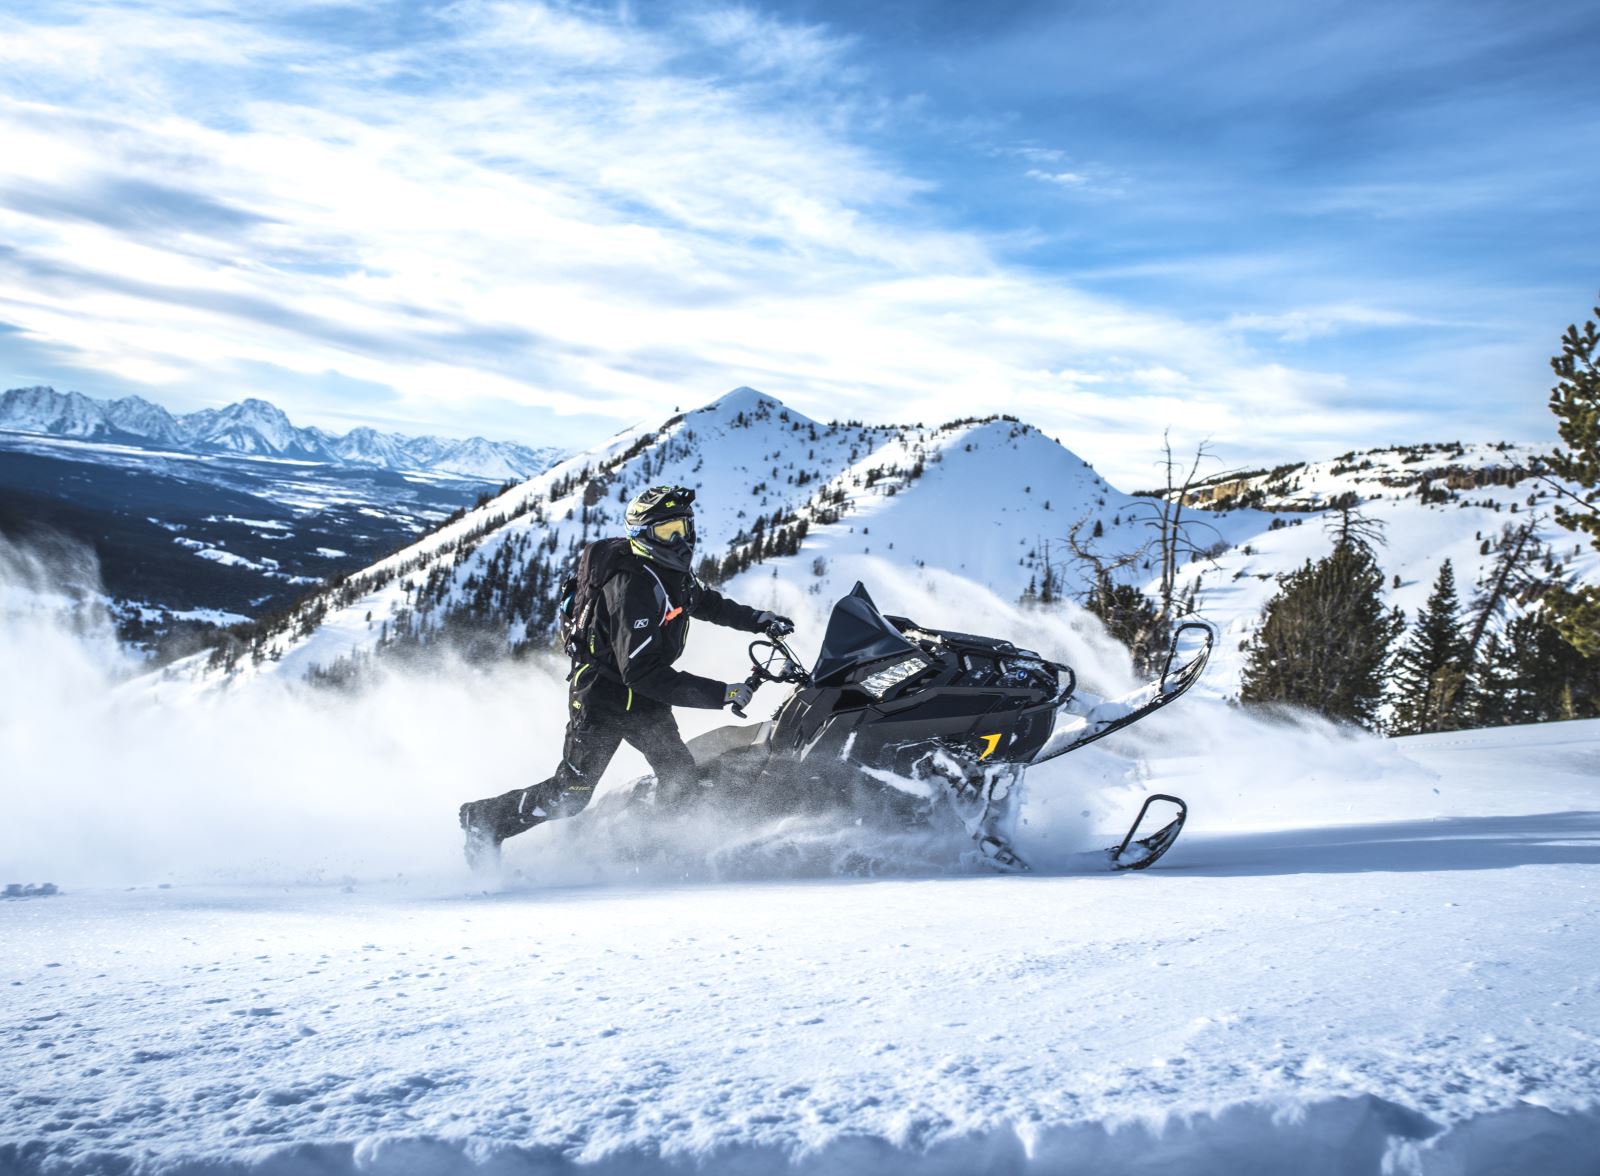 Polaris Snowmobile Lineup Features New Technology, New Models, All New Polaris 850 Patriot Engine